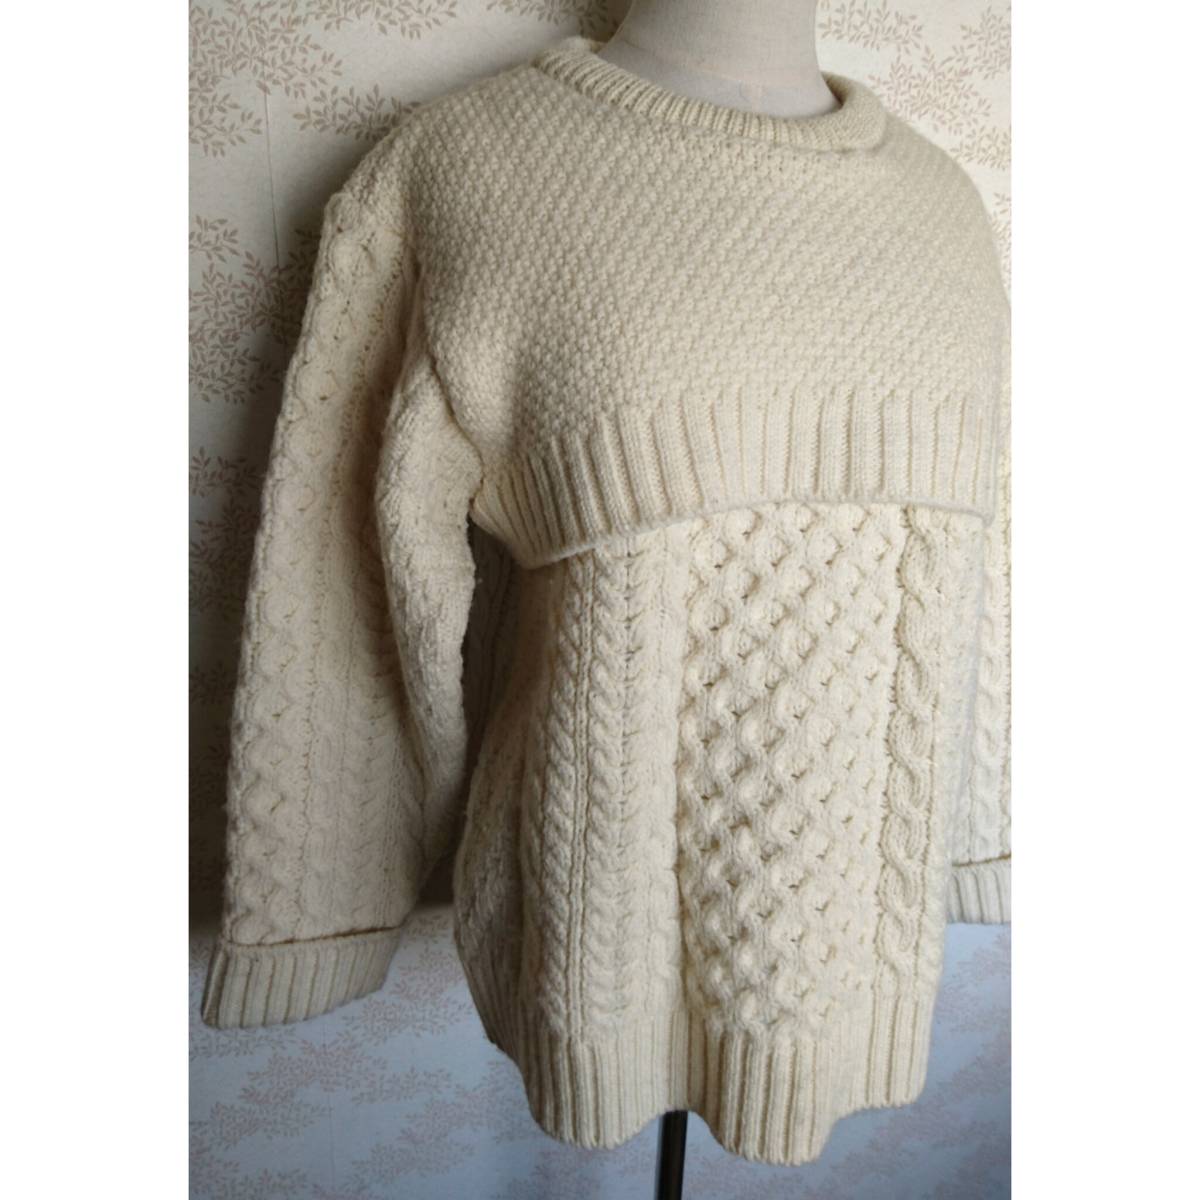 ROSEBUD ROSE BUD Rose Bud cable knitted Alain knitted vintage fisherman Vintage knitted sweater Fisherman old clothes 